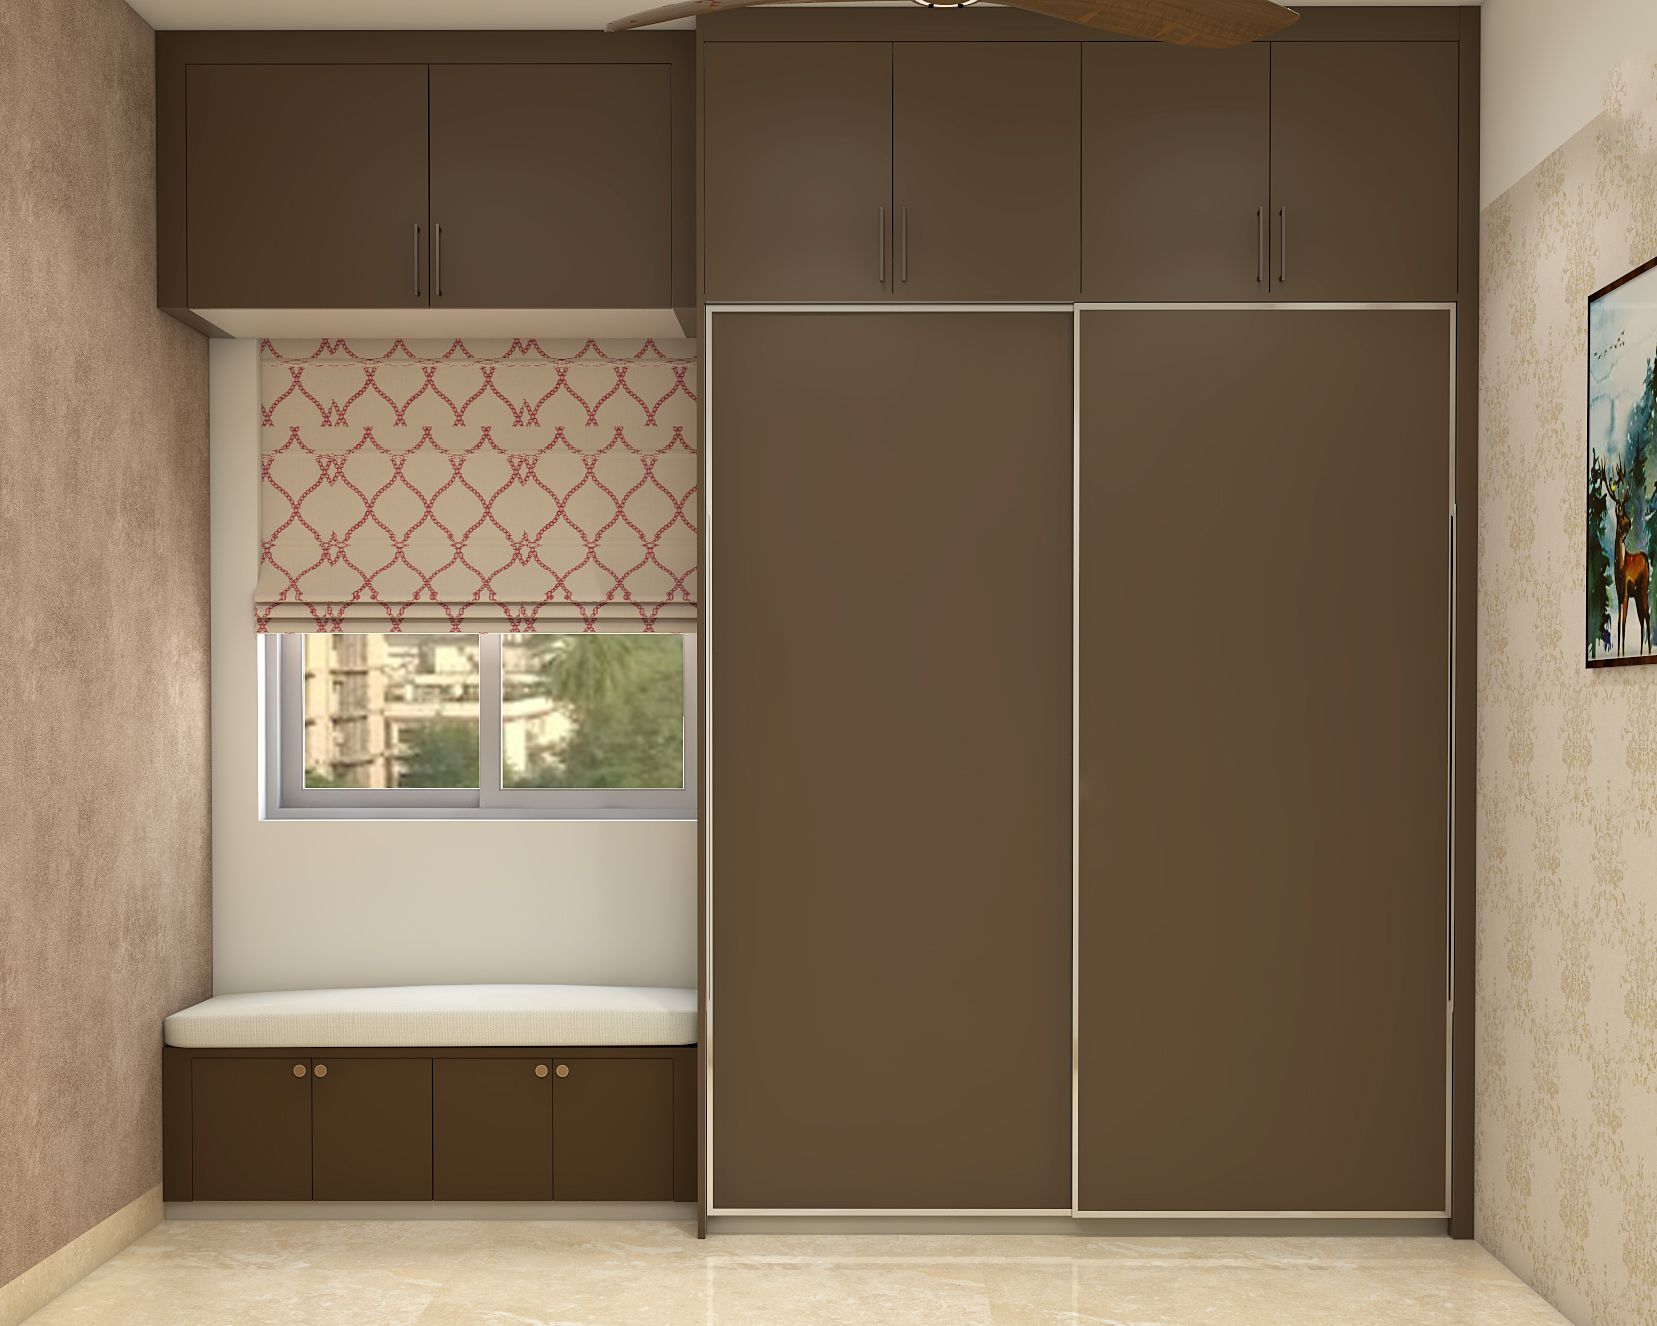 Modern 2-Door Sliding Wardrobe Design With A Built-In Seating Area